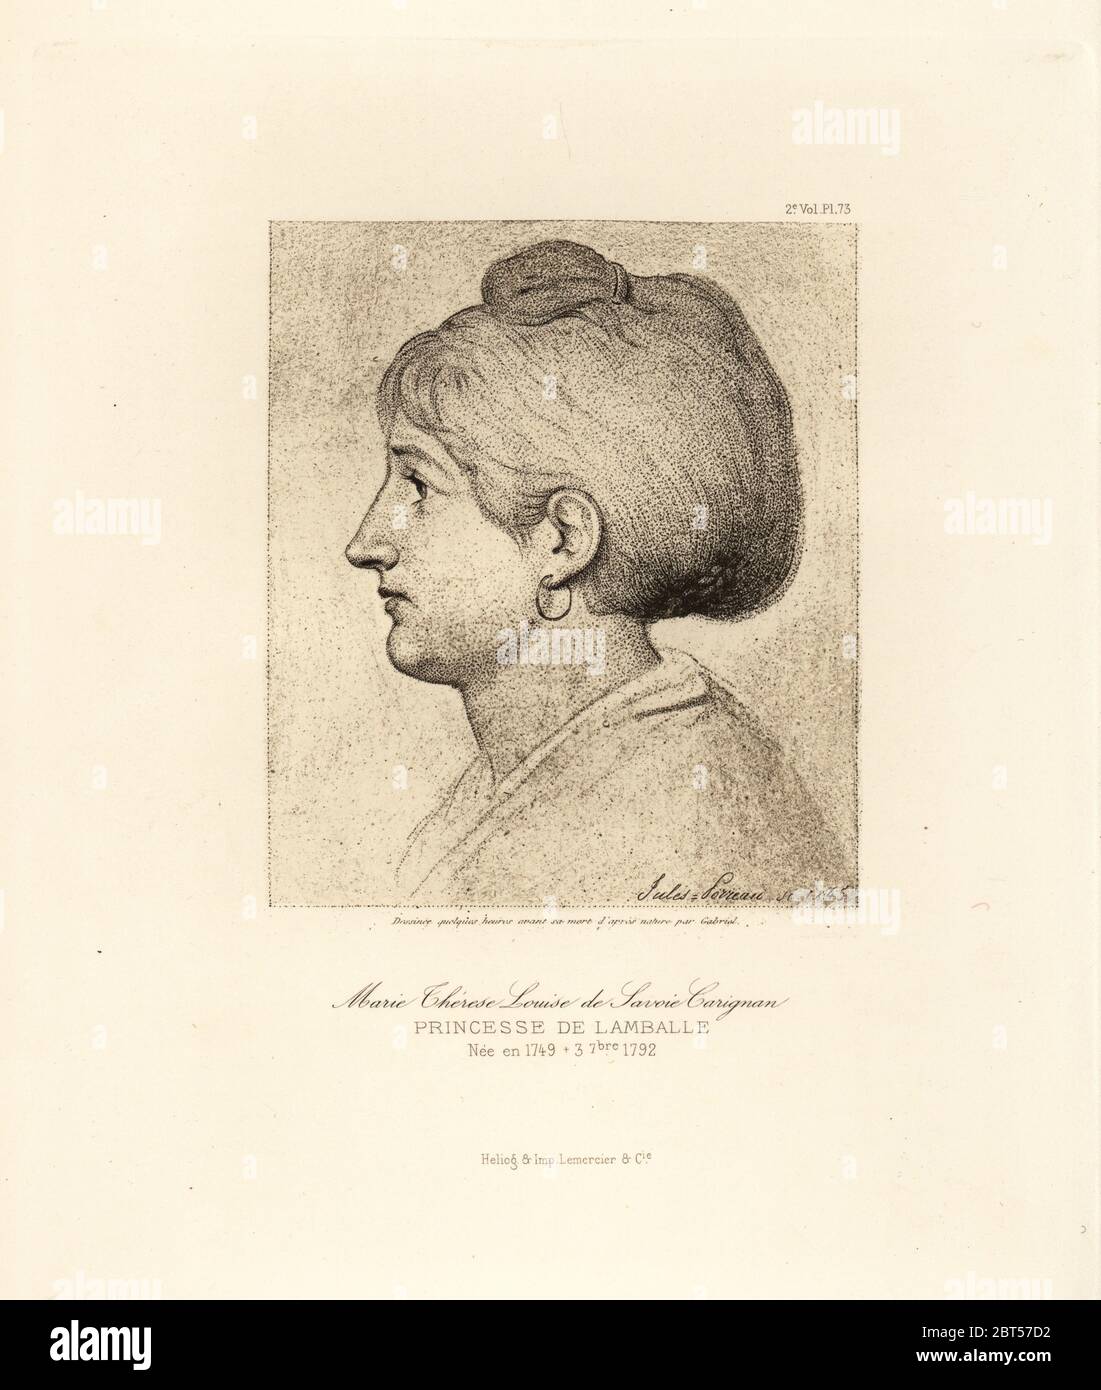 Portrait of Marie-Louise Therese of Savoy-Carignan, Princesse de Lamballe, hours before her execution, 3 September 1792. Lithograph by Jules Sorreau after a drawing by Georges Francois Marie Gabriel from Fashions and Customs of Marie Antoinette and her Times, by Le Comte de Reiset, Paris, 1885. The journal of Madame Eloffe, dressmaker and linen-merchant to the Queen and ladies of the court. Stock Photo